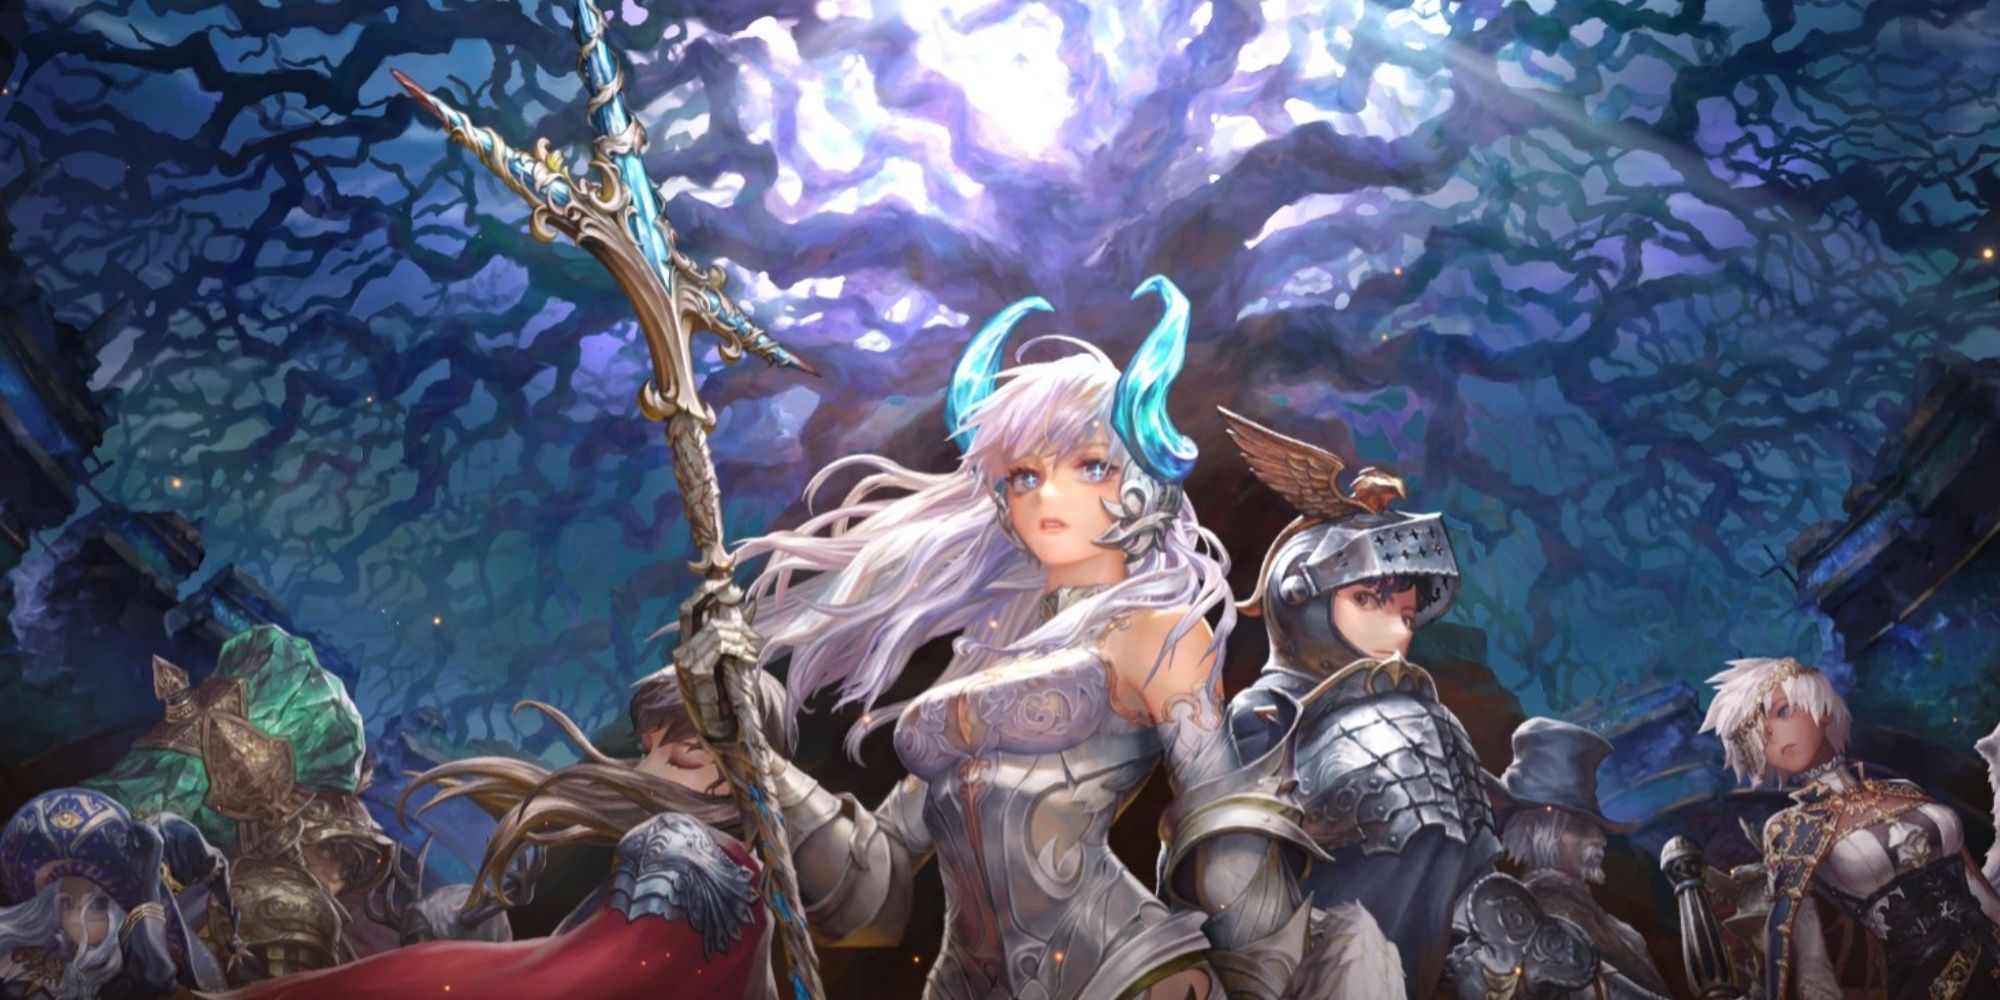 The home screen for Astra: Knights of Veda featuring Veda in the middle surrounded by her Knights.